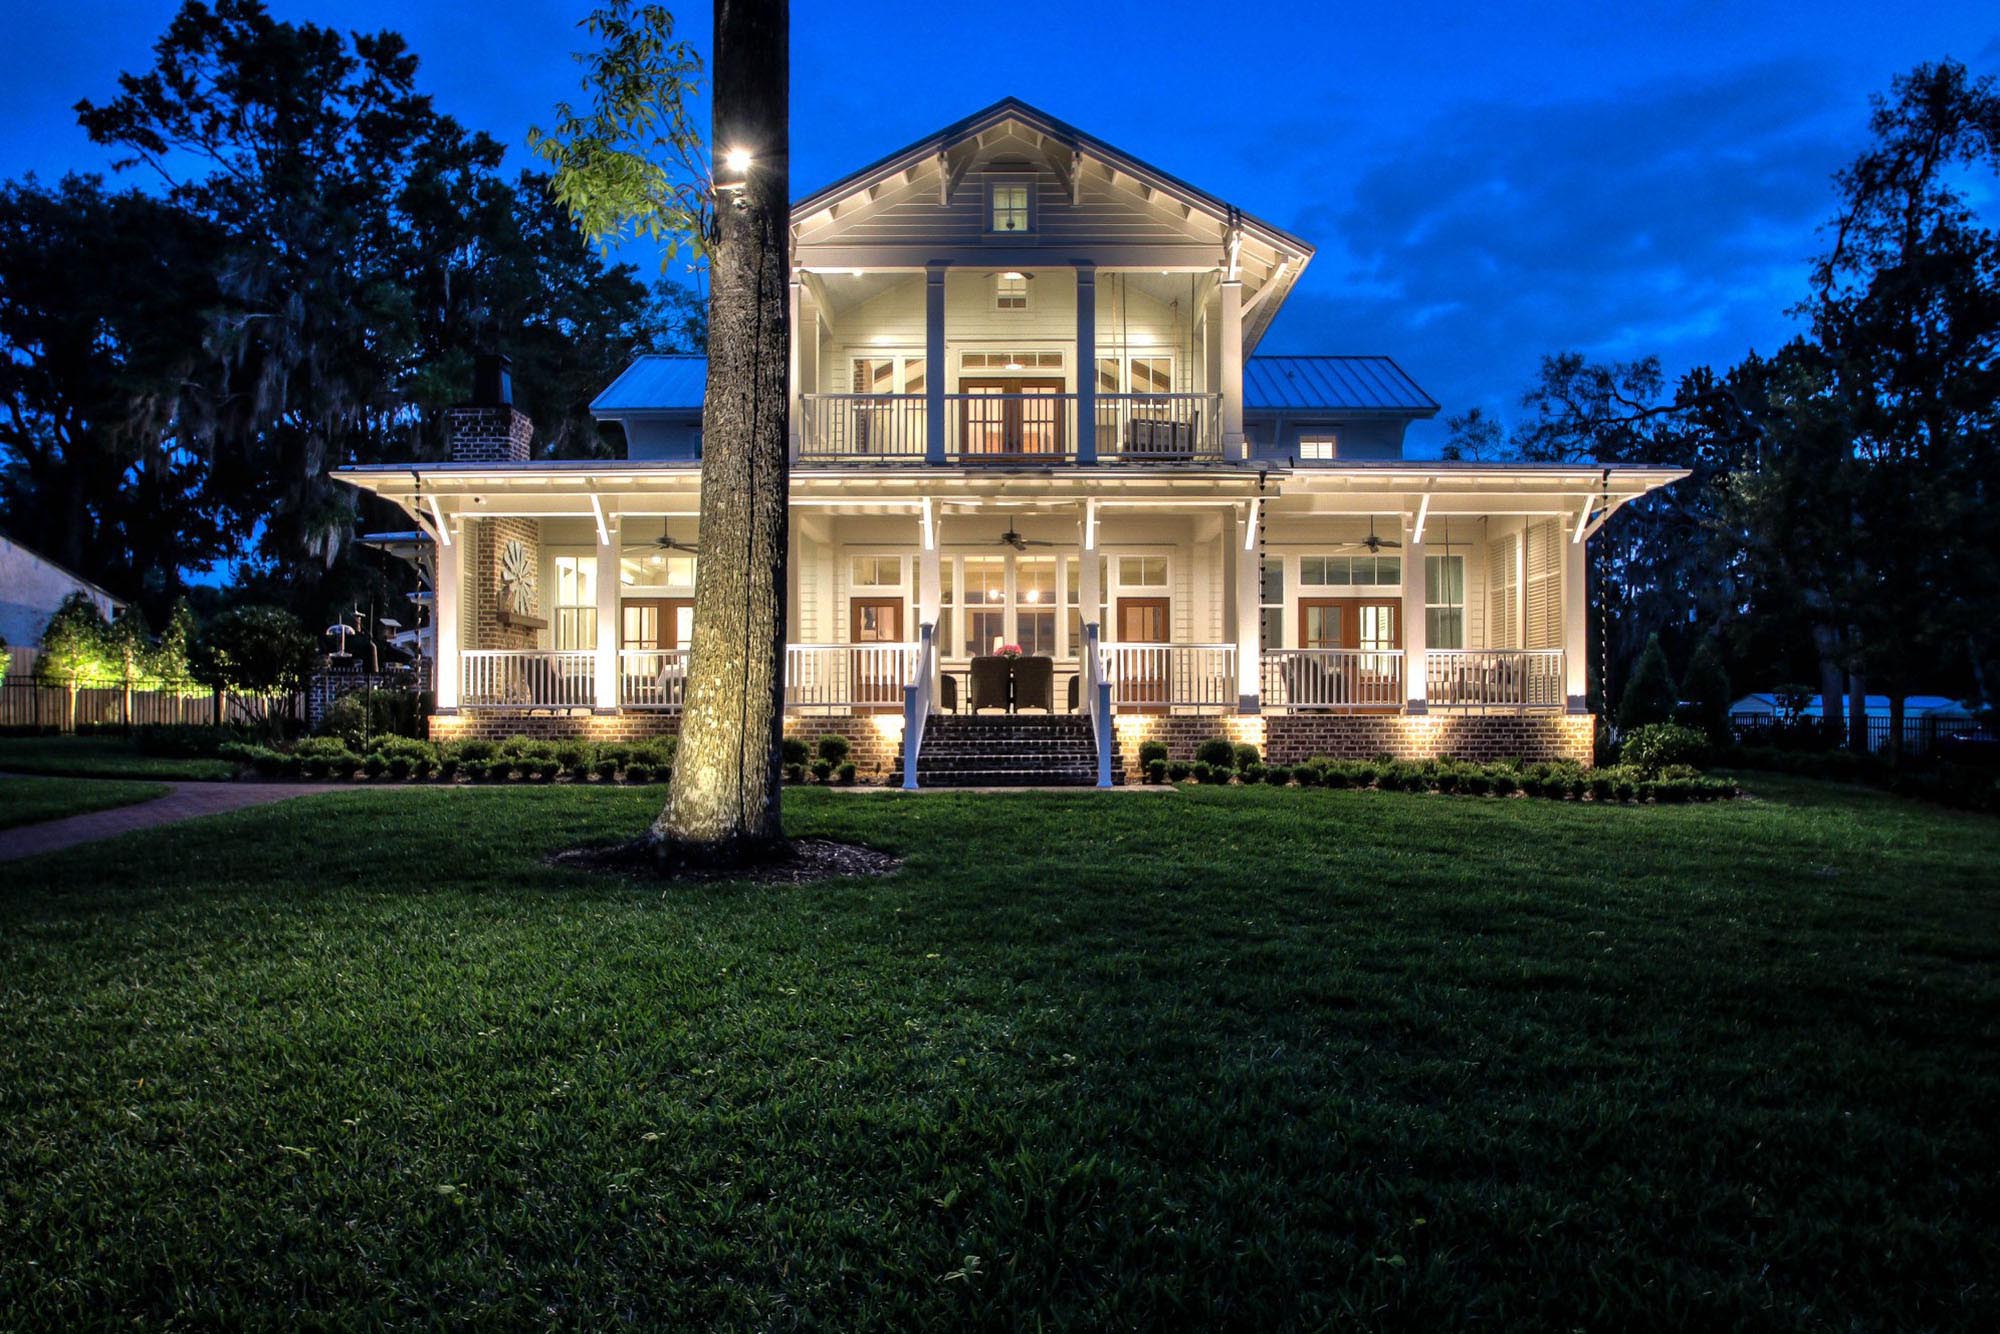 The Benefits of Low Voltage LED Outdoor Lighting - Dusk To Dawn STL